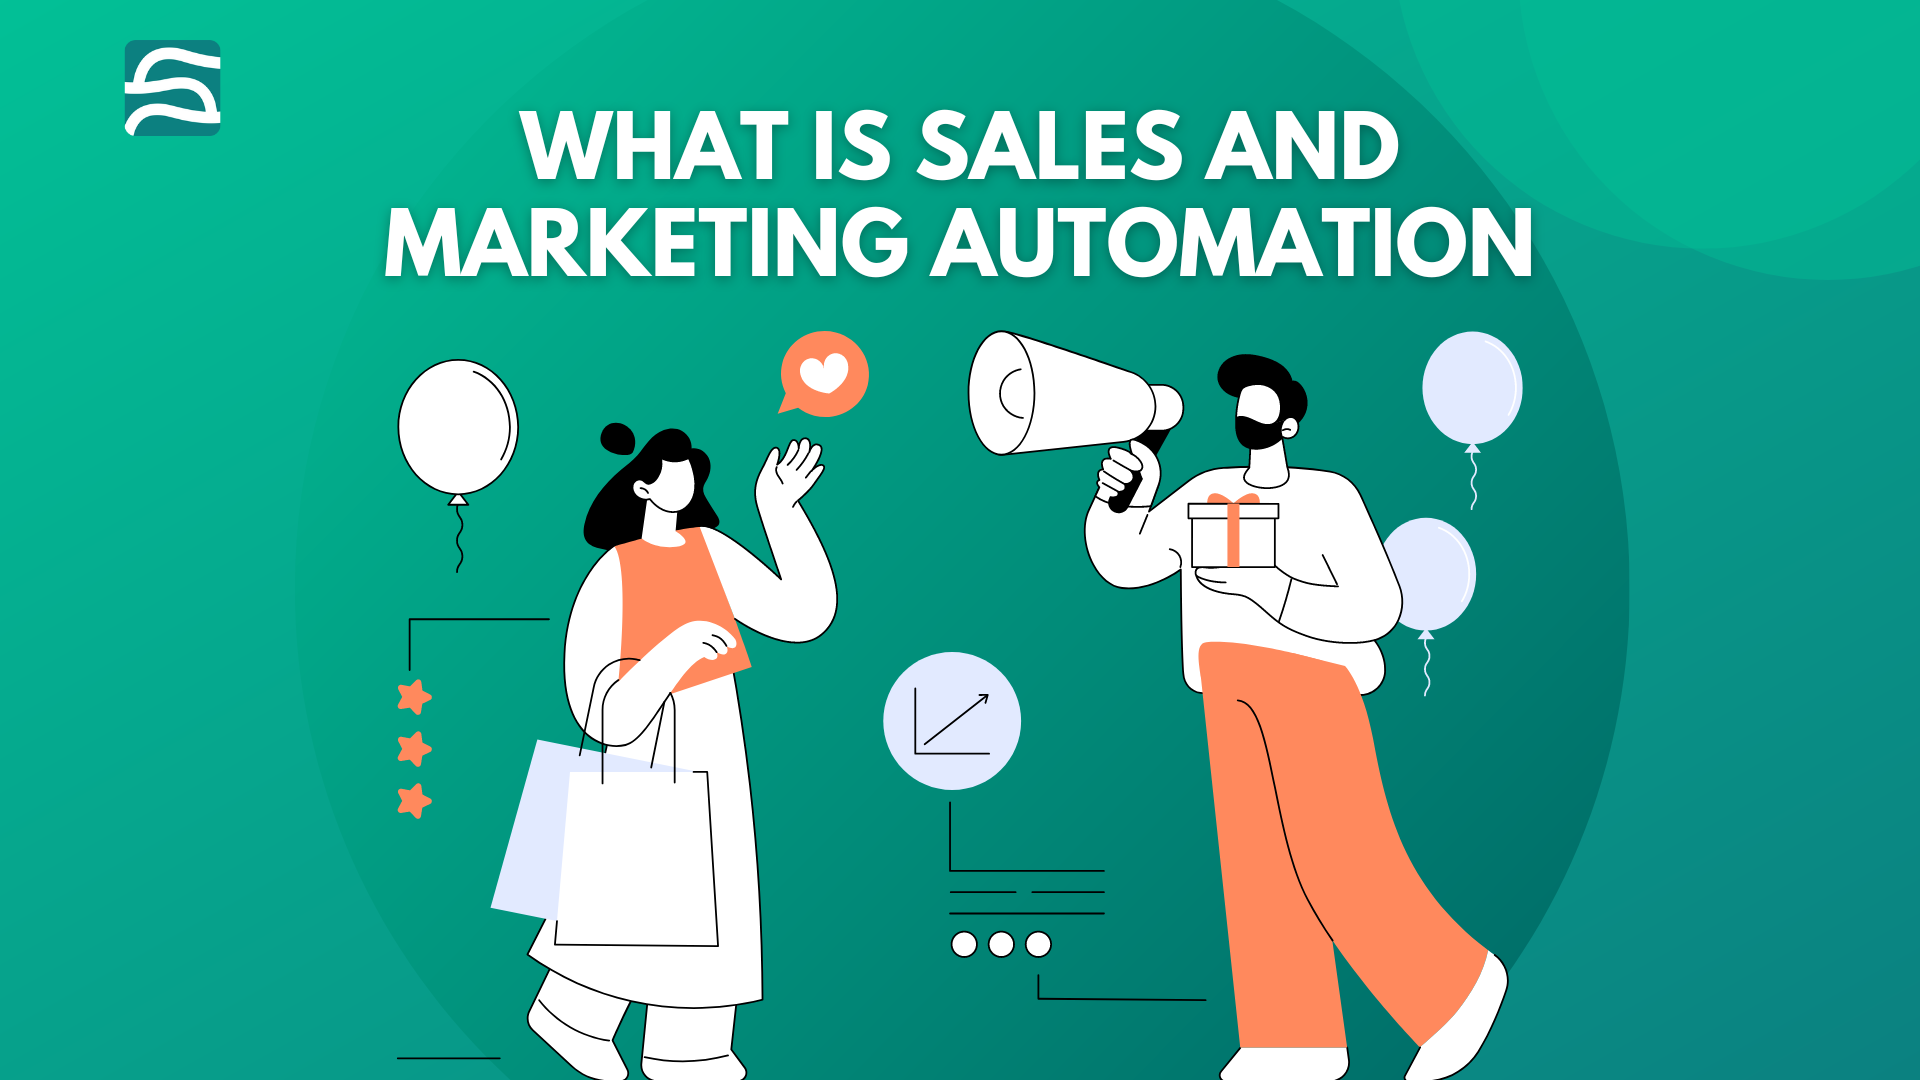 sales and marketing automation: What is Sales and Marketing Automation?